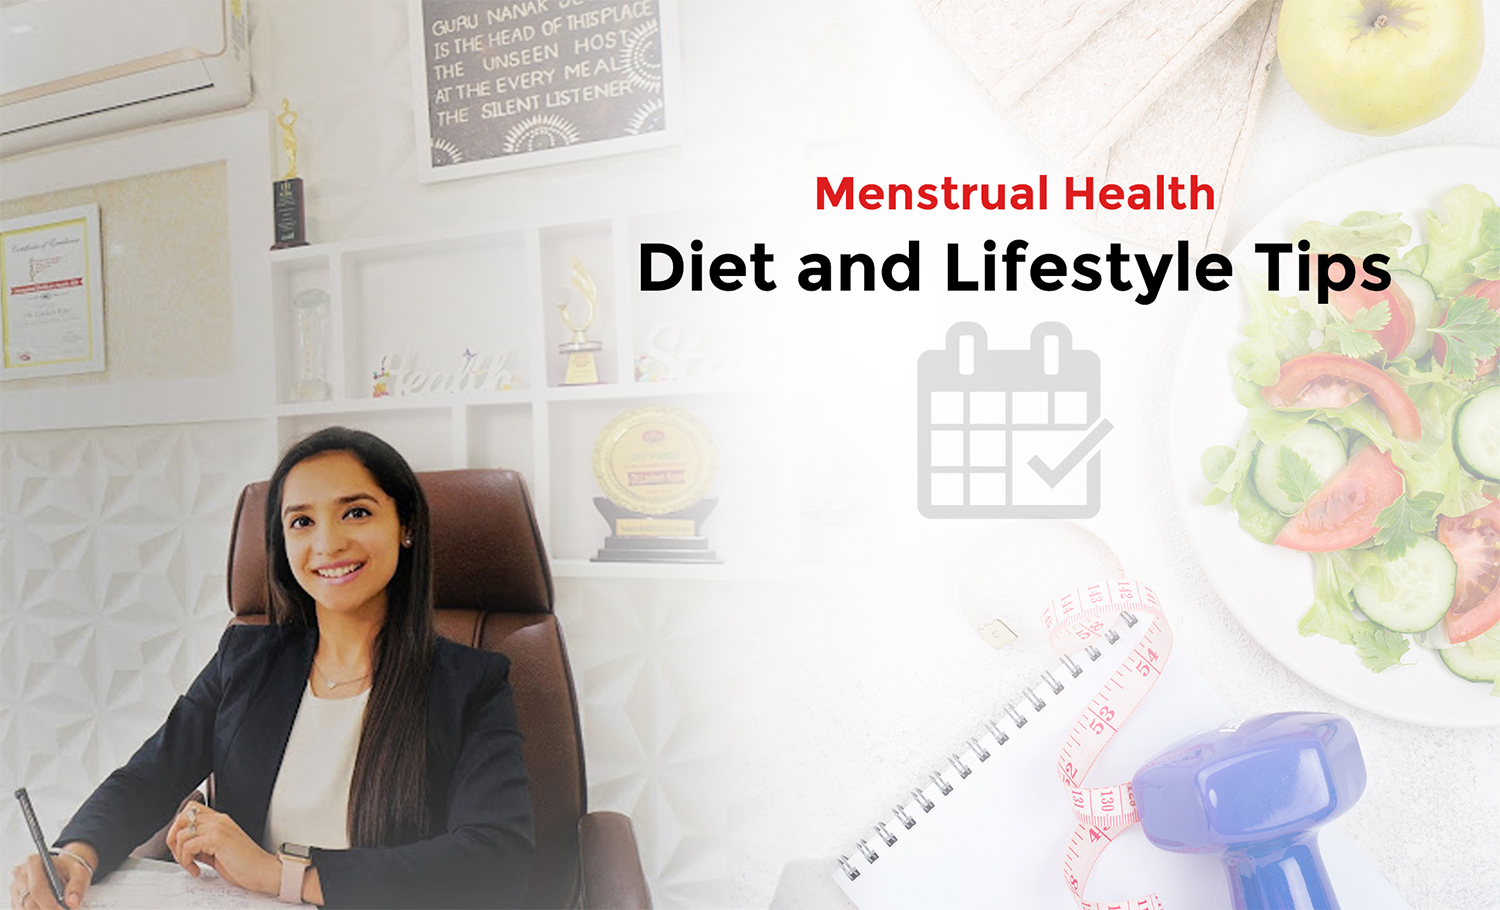 Diet and lifestyle Tips for Menstrual Health